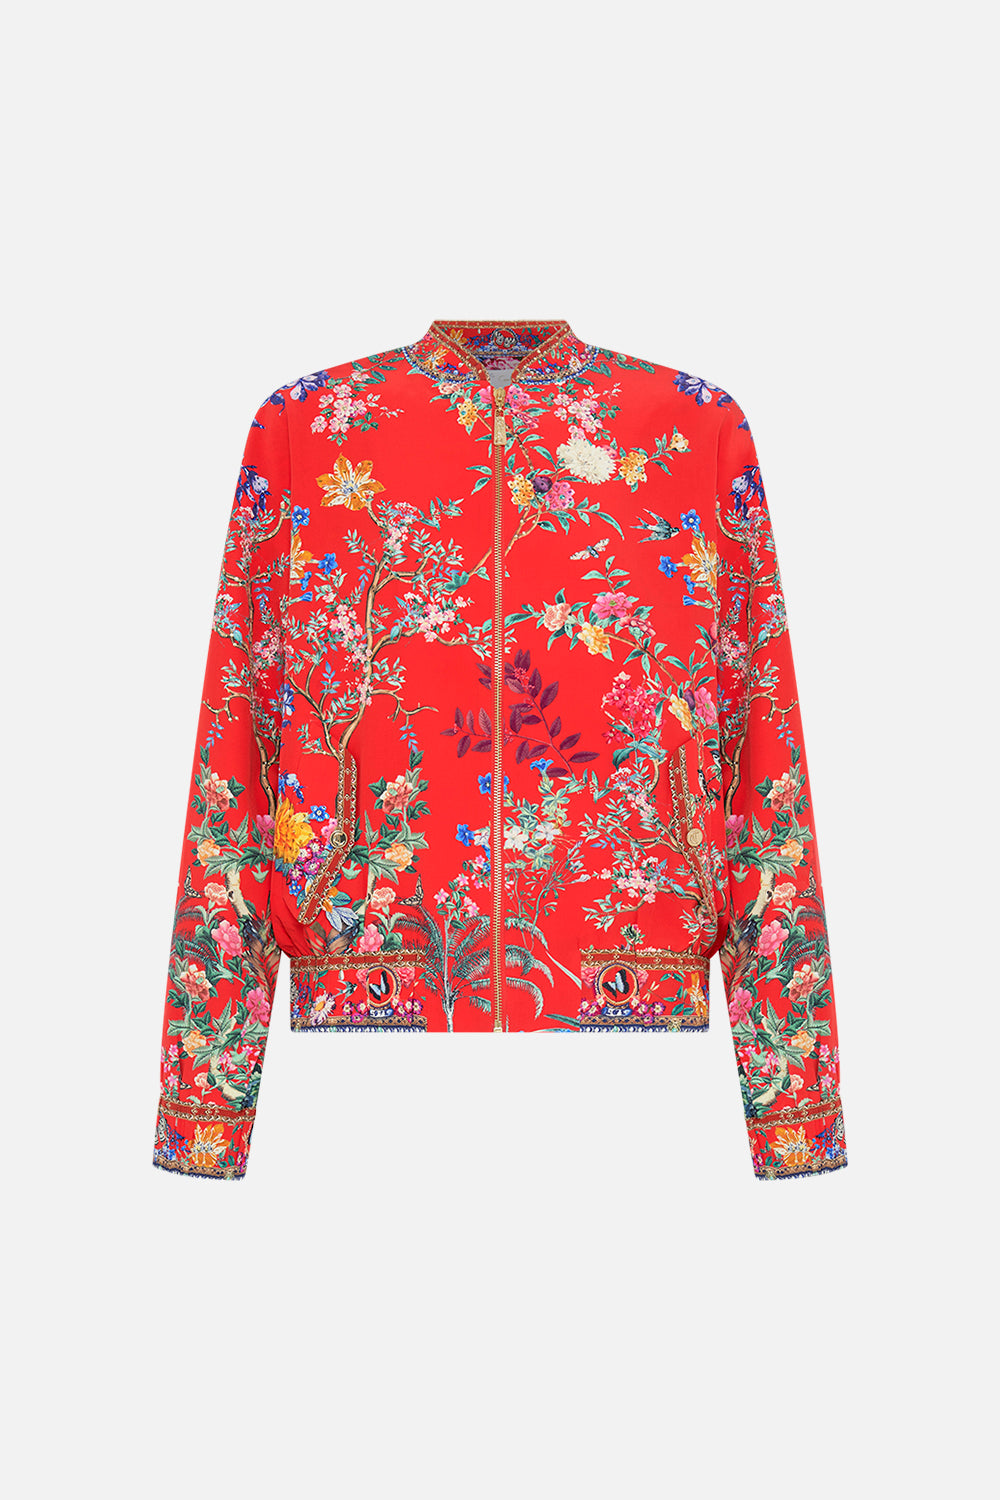 CAMILLA silk floral print bomber jacket in The Summer Palace print